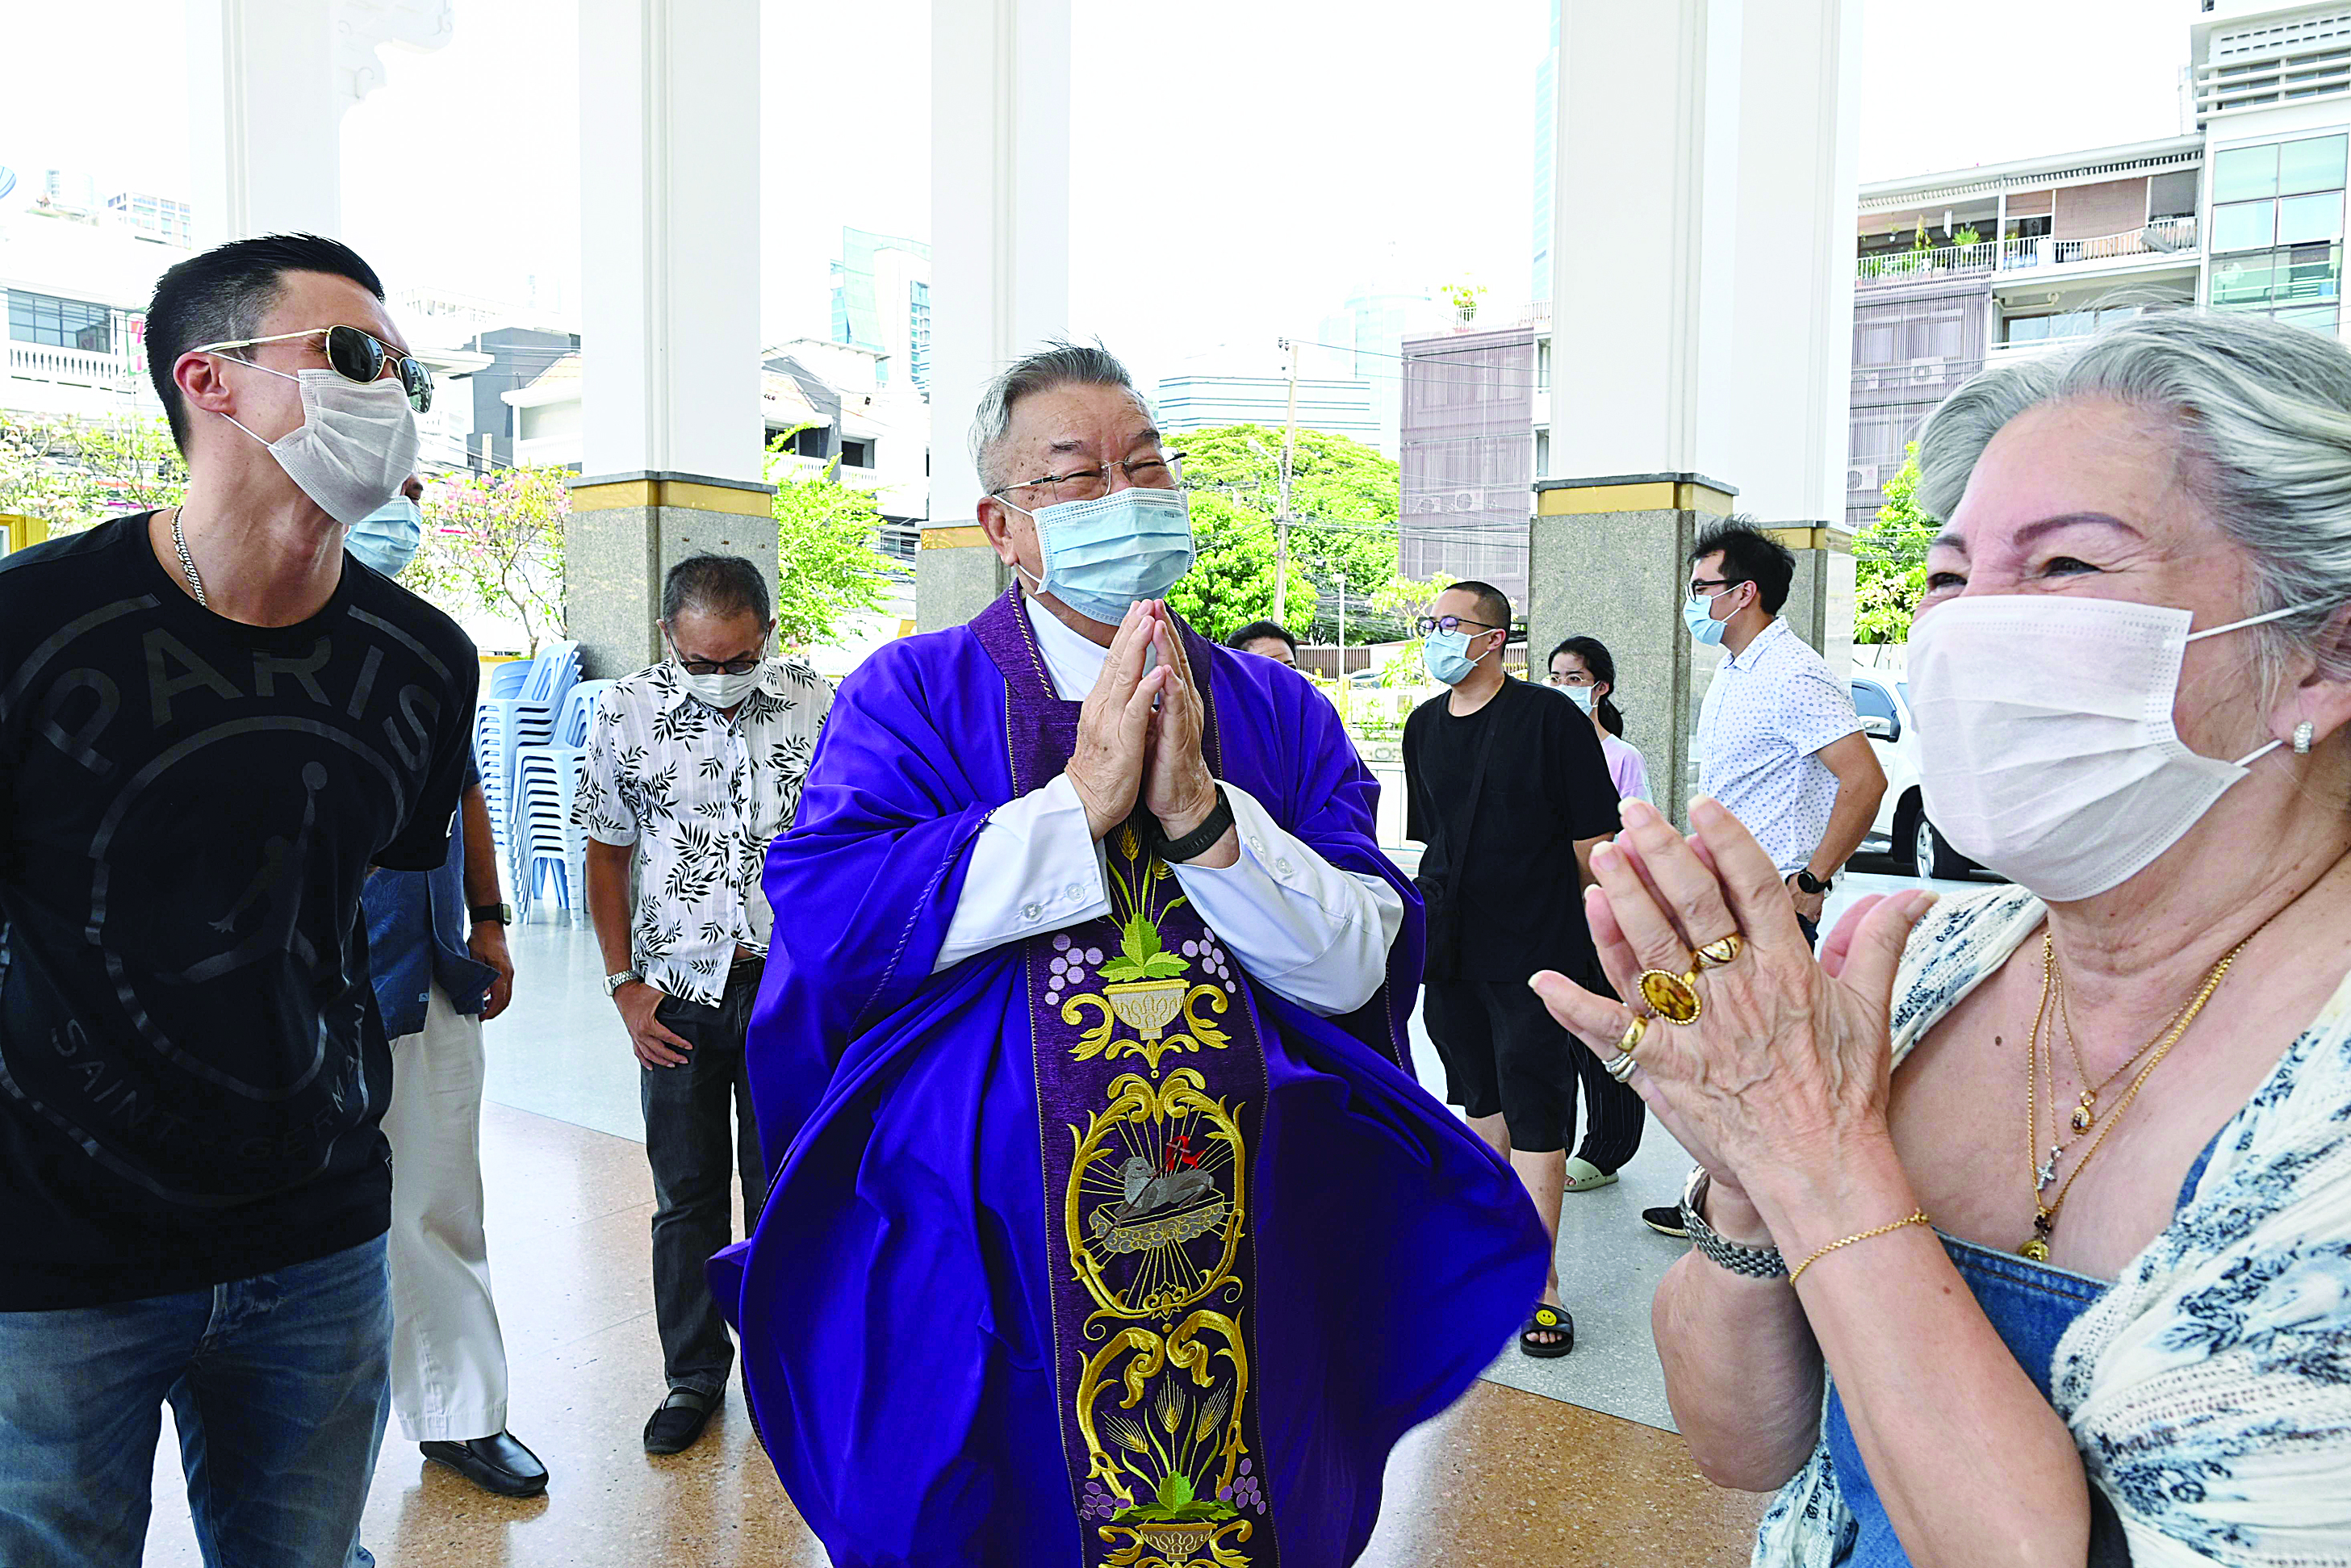 Father Paul Nettham (C), wearing a face mask as a preventive measure against the spread of the COVID-19 novel coronavirus, greets devotees after a mass at the Holy Redeemer church in Bangkok on March 22, 2020. (Photo by Romeo GACAD / AFP)